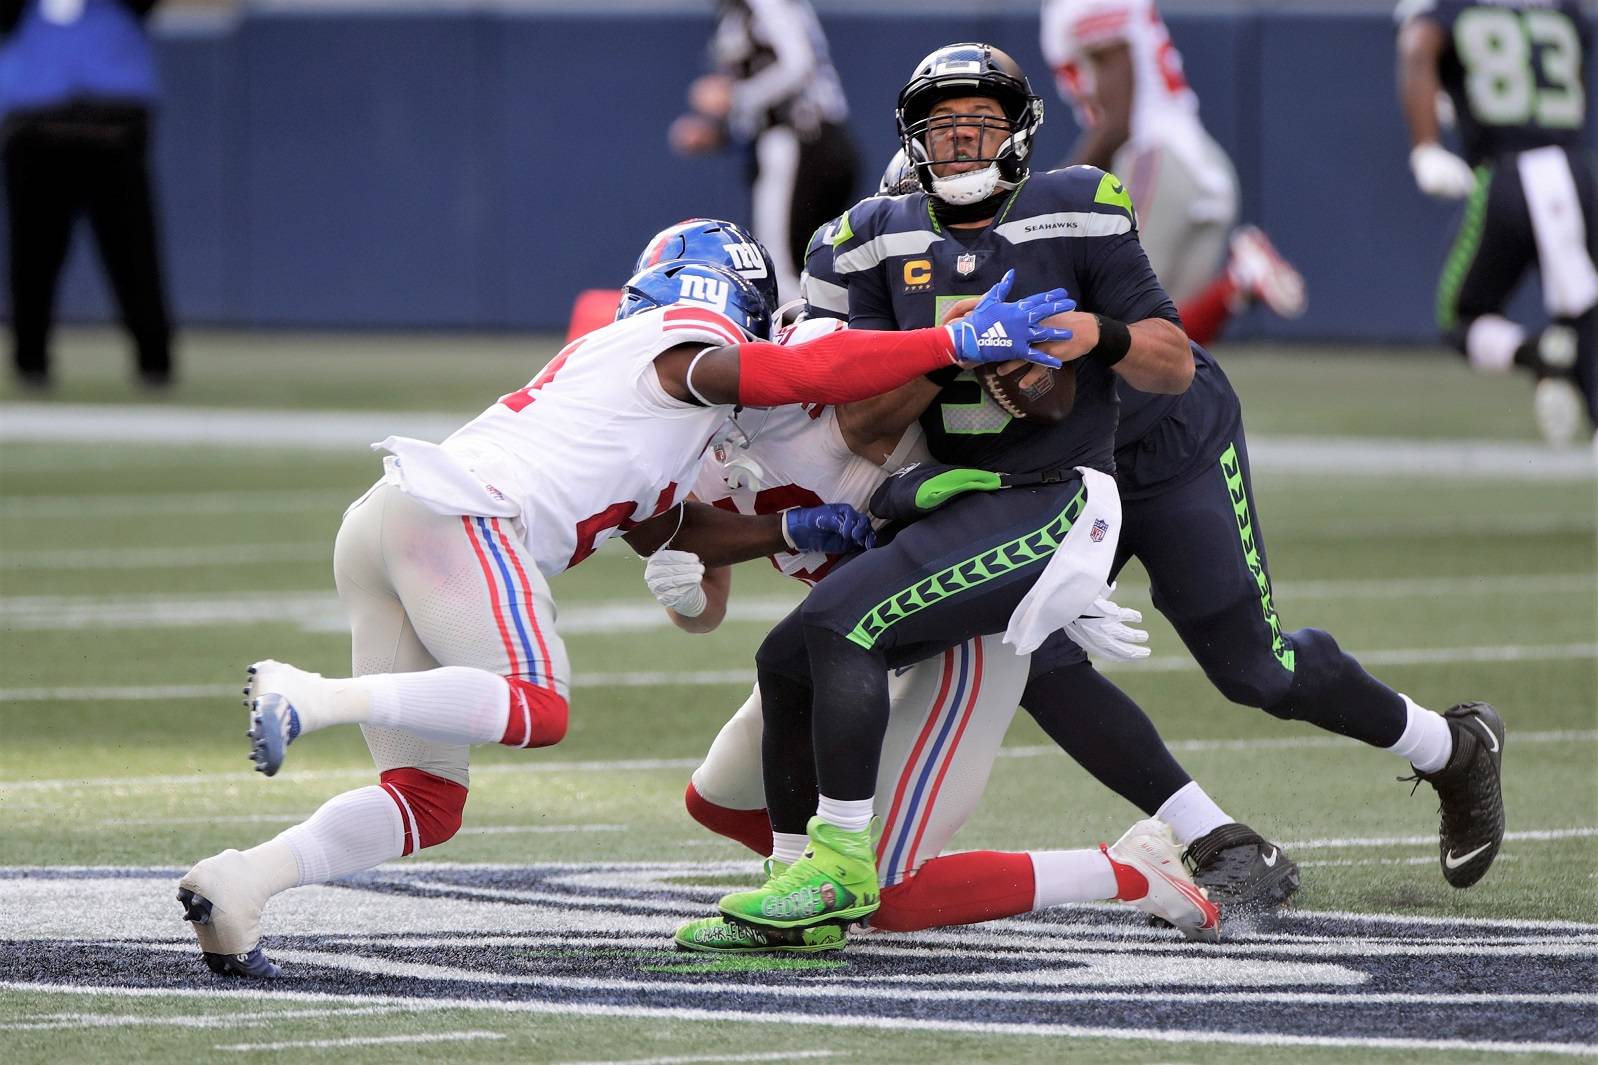 Seattle Seahawks quarterback Russell Wilson is sacked by New York Giants safety Jabrill Peppers, left, during the first half of an NFL football game, Sunday, Dec. 6, 2020, in Seattle. (AP Photo/Larry Maurer)